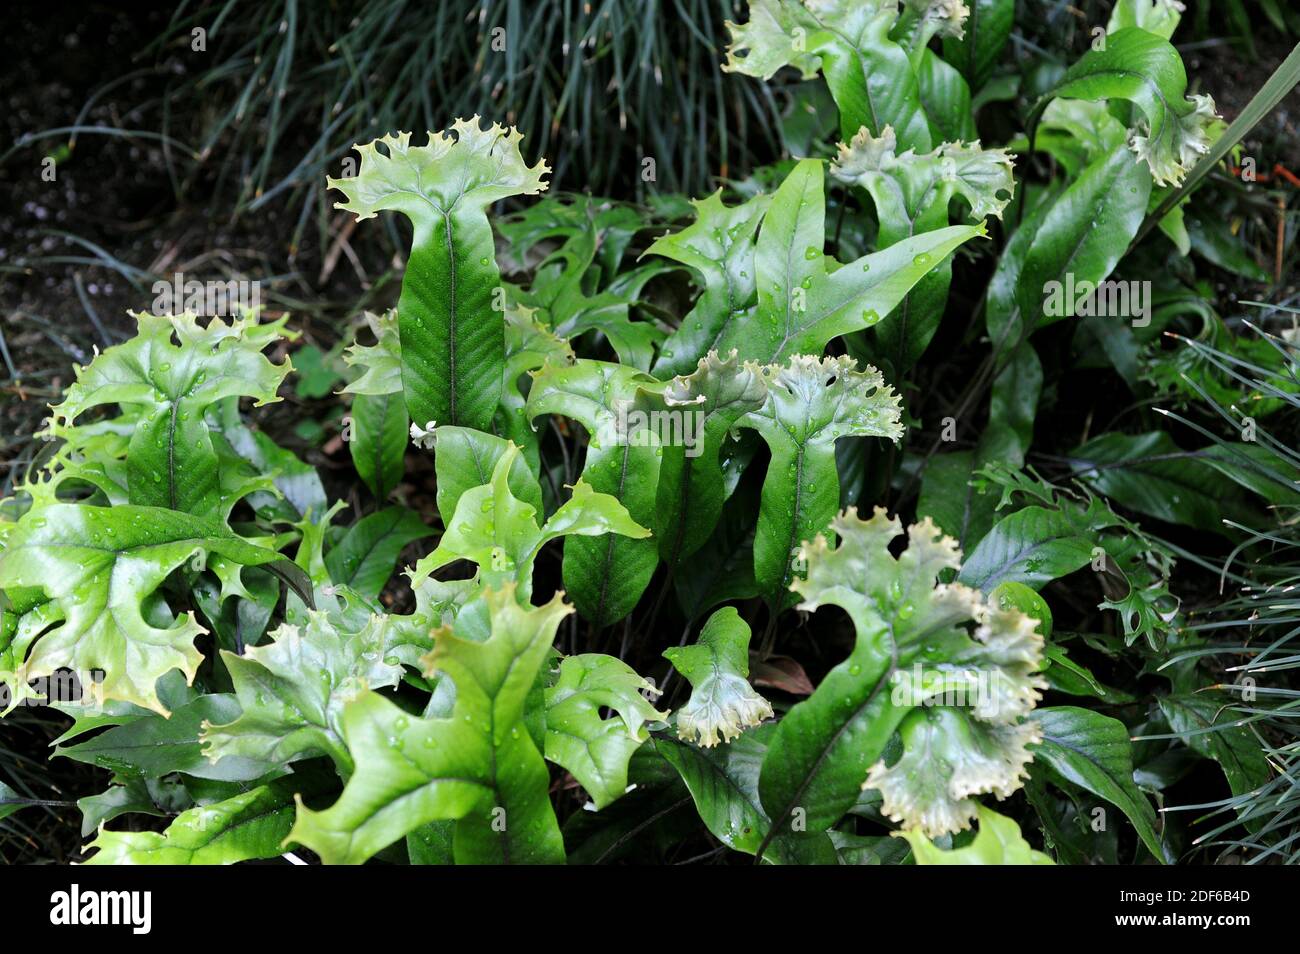 Pyrrosia lingua cristata is an ornamental epiphytic fern native to Asia. Pteridophyta. Polypodiaceae. This photo was taken in a garden. Stock Photo